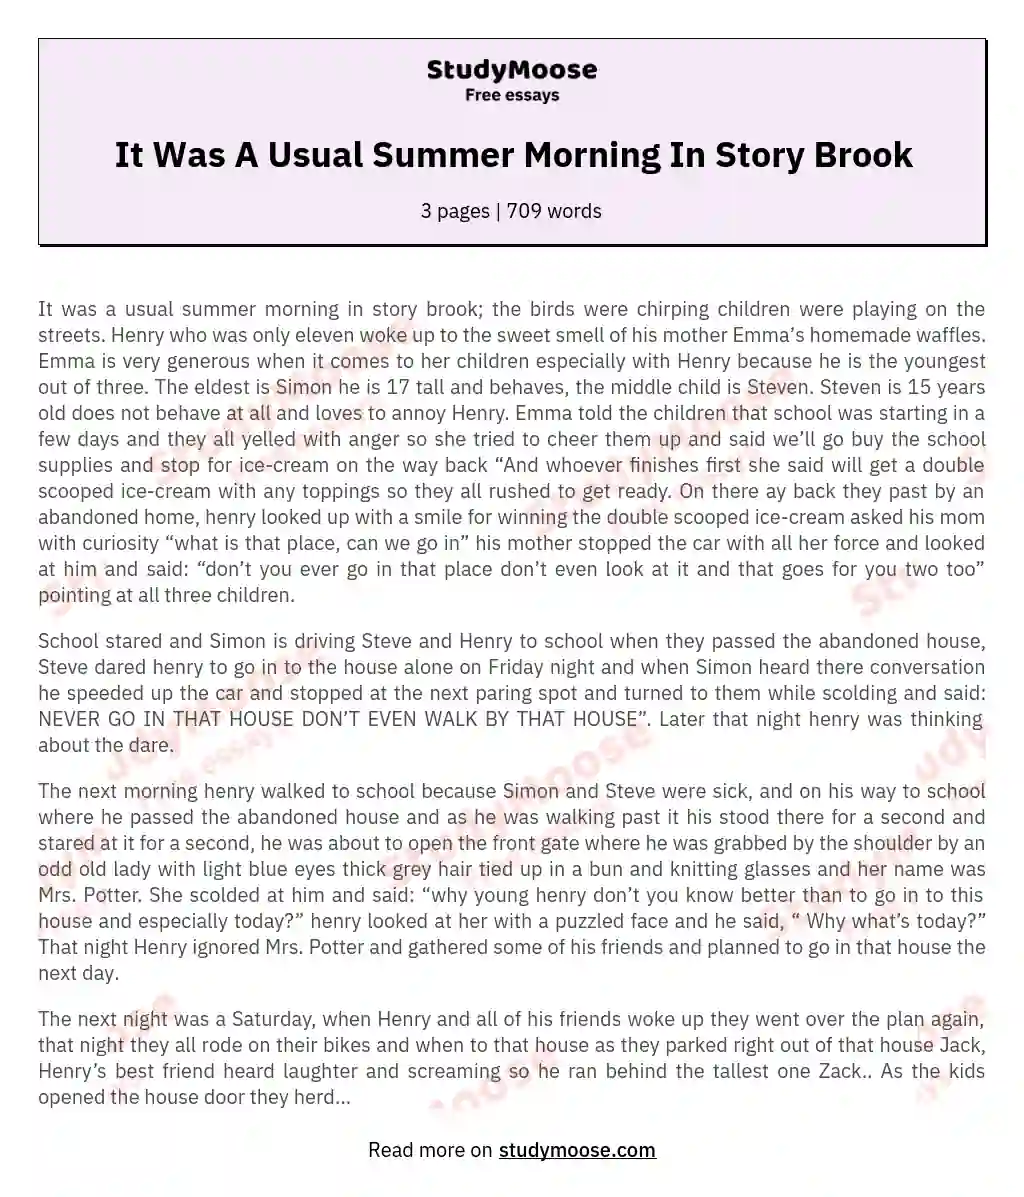 It Was A Usual Summer Morning In Story Brook essay